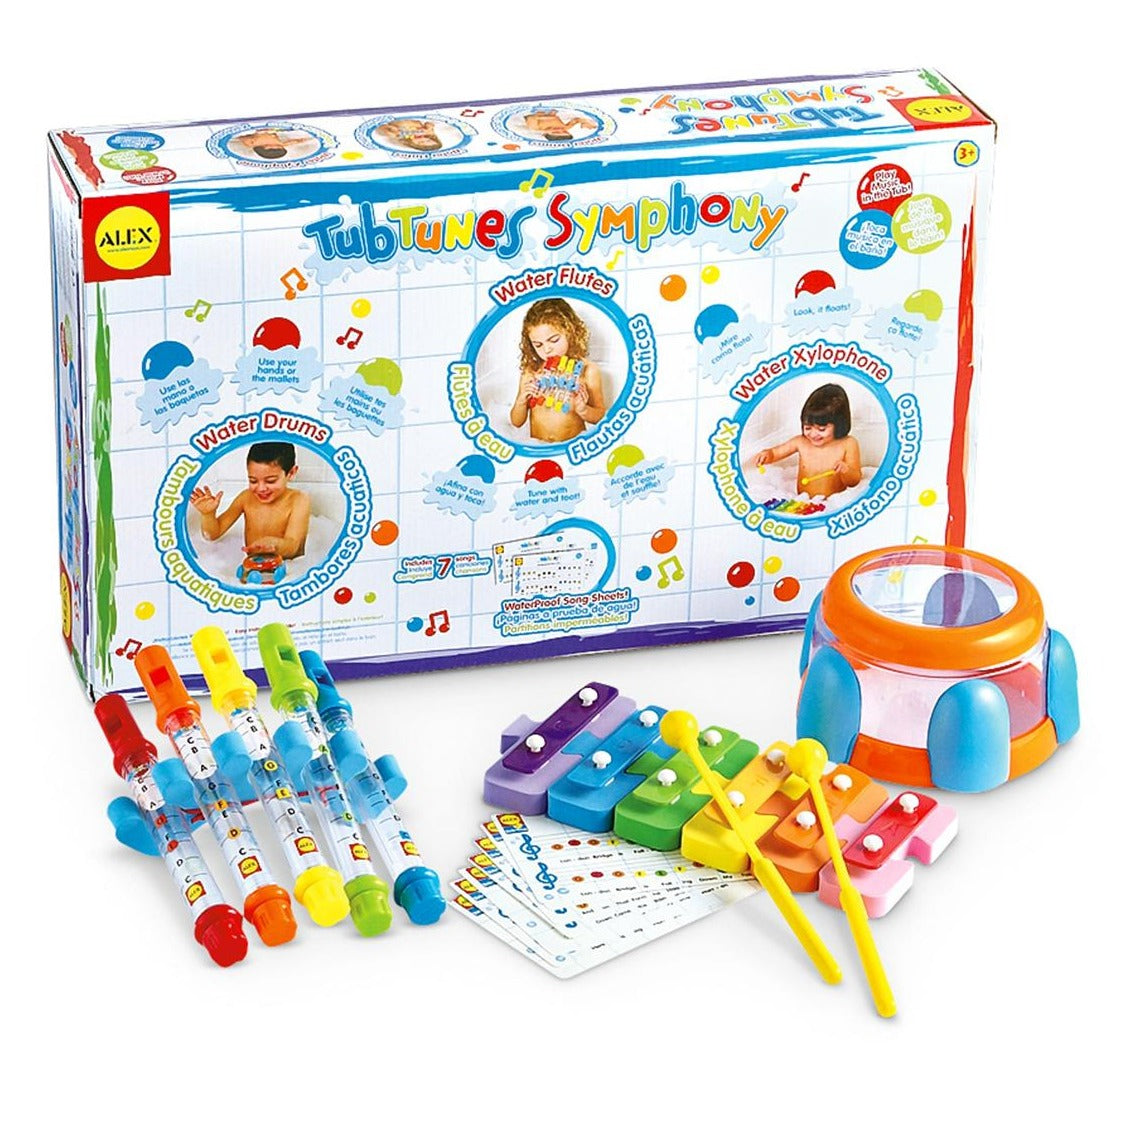 Tub Tunes Symphony Bath Toy Set, Working musical instruments for the bath tub! Learn the xylophone, drum, and flute with laminated music sheets for each instrument.The Tub Tunes Symphony Bath Toy Set includes mallets for drumming and playing the xylophone. Try these bath toys out of the bath tub too to make beautiful music anywhere! 3 real instruments for the bathtub Play music in the tub Turn bath time into show time Includes water xylophone, 2 mallets, water drum and water flutes plus 7 waterproof song sh